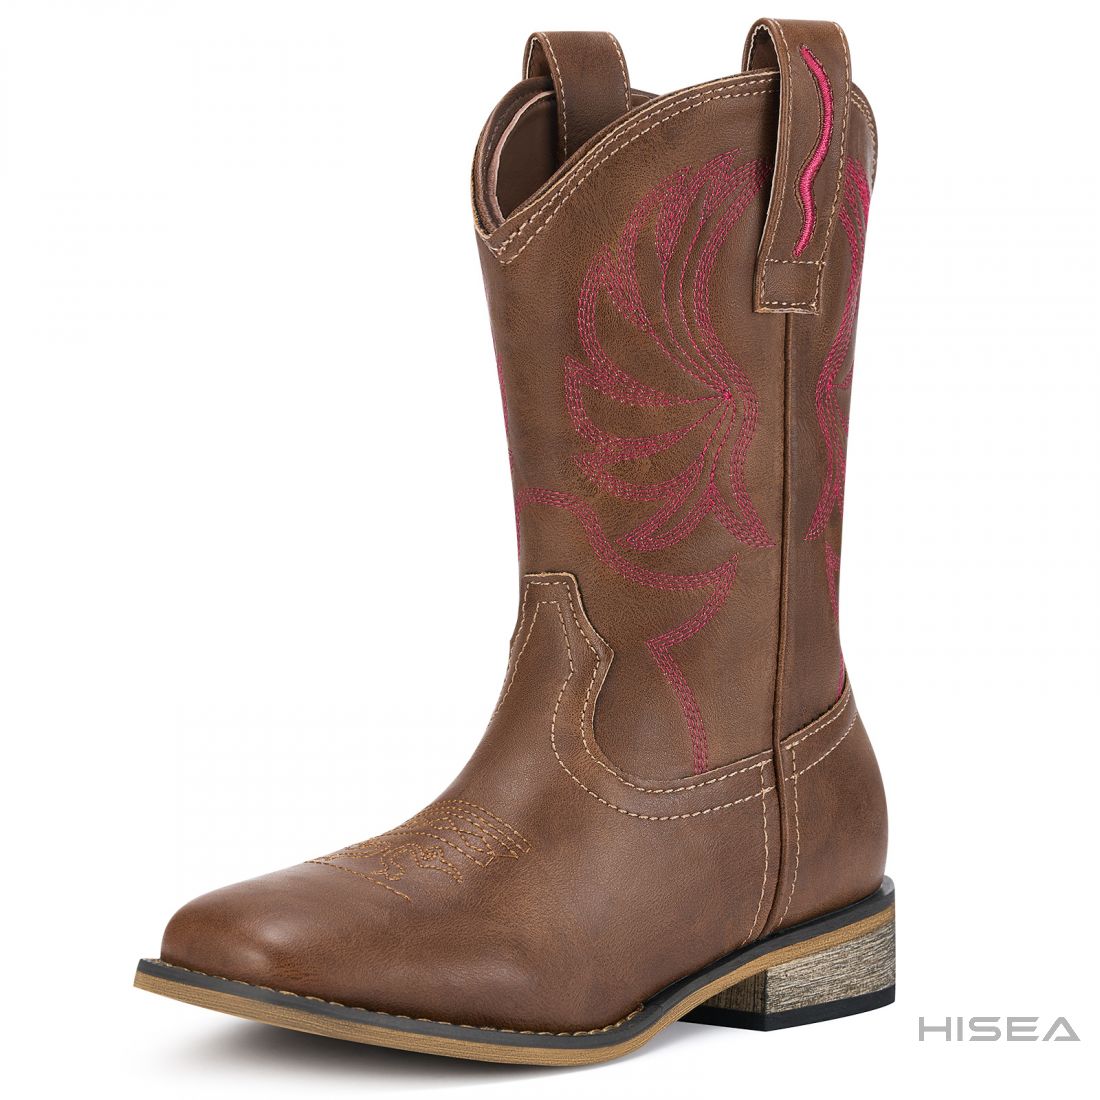 Kid's Classic Western Cowboy Boots